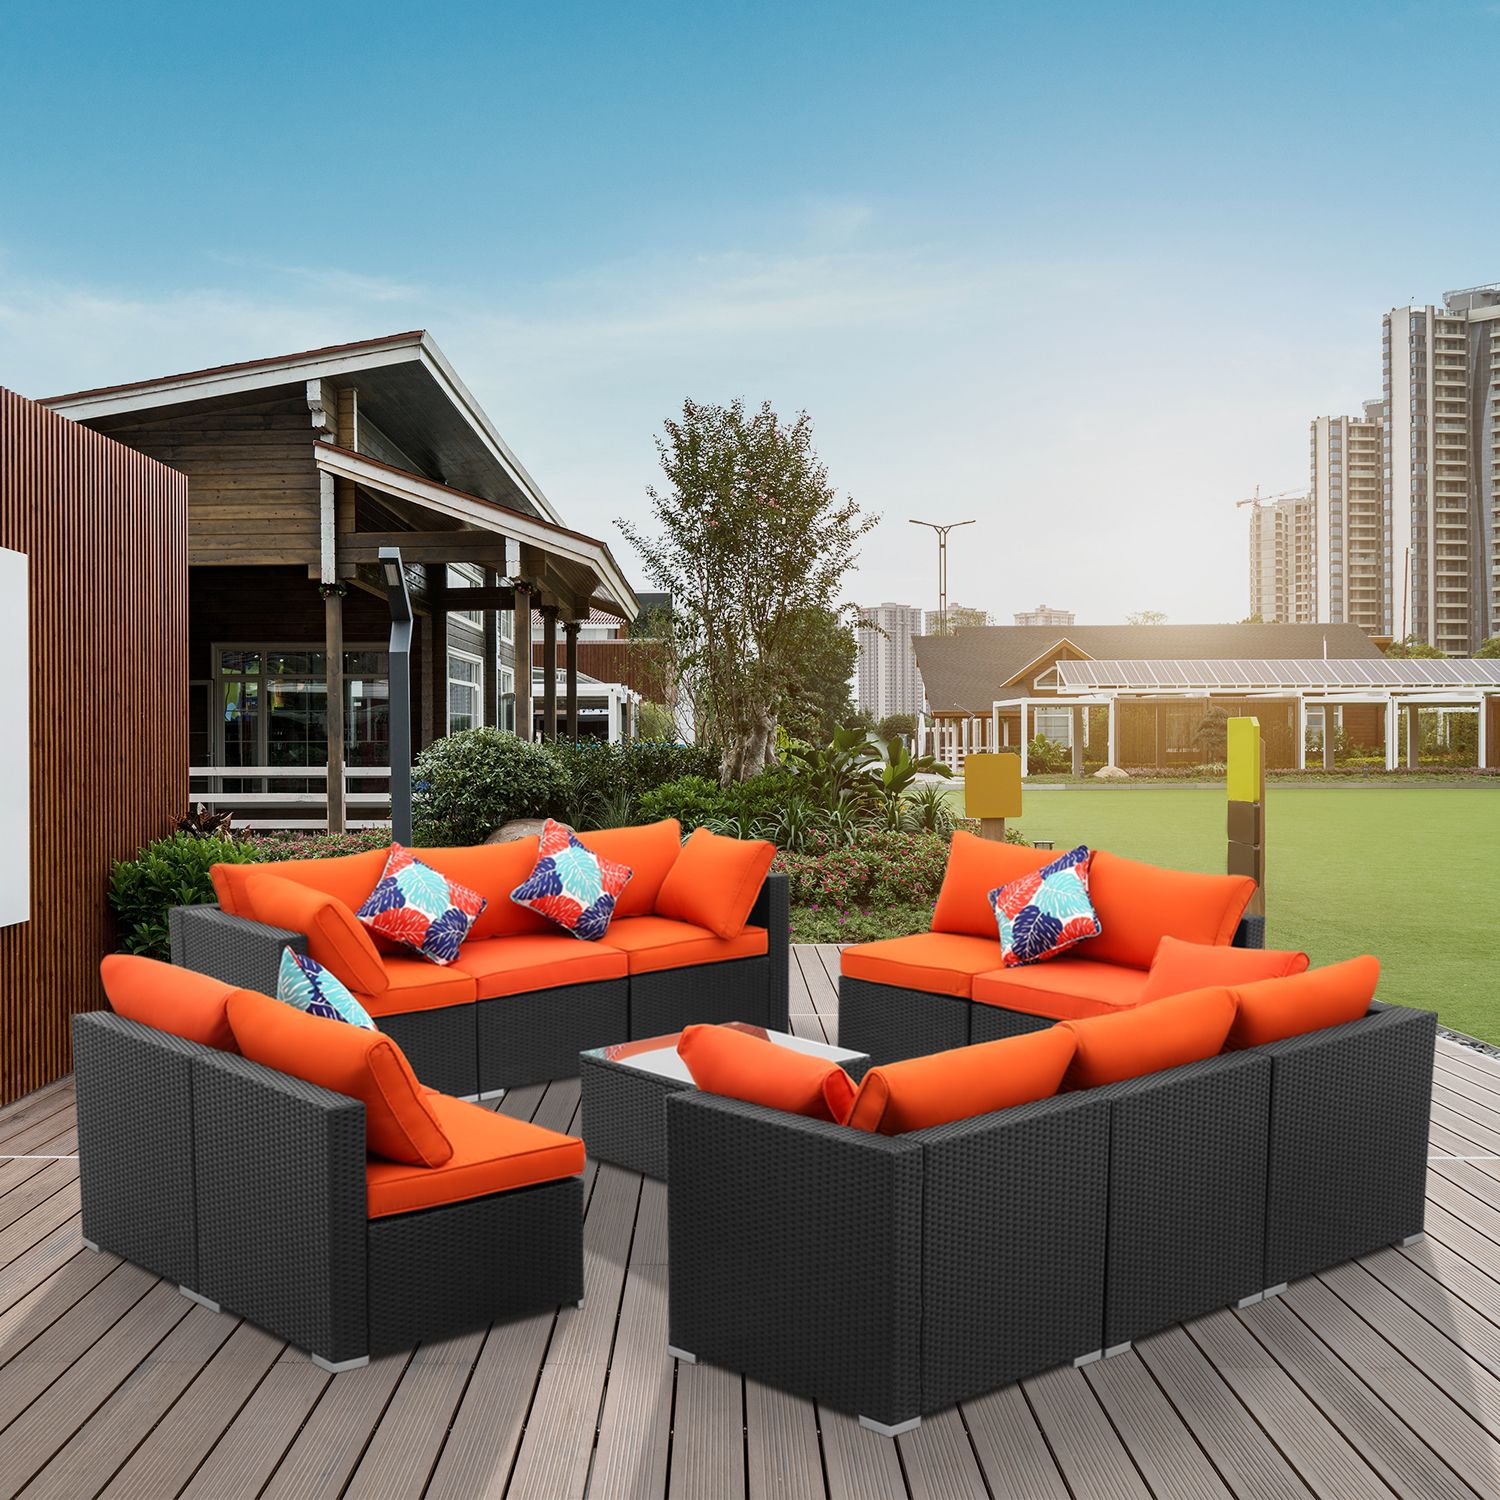 Wesfital Patio Furniture 11 Pieces Rattan Wicker Sectional Sofa Seating Within Outdoor Wicker Orange Cushion Patio Sets (View 5 of 15)